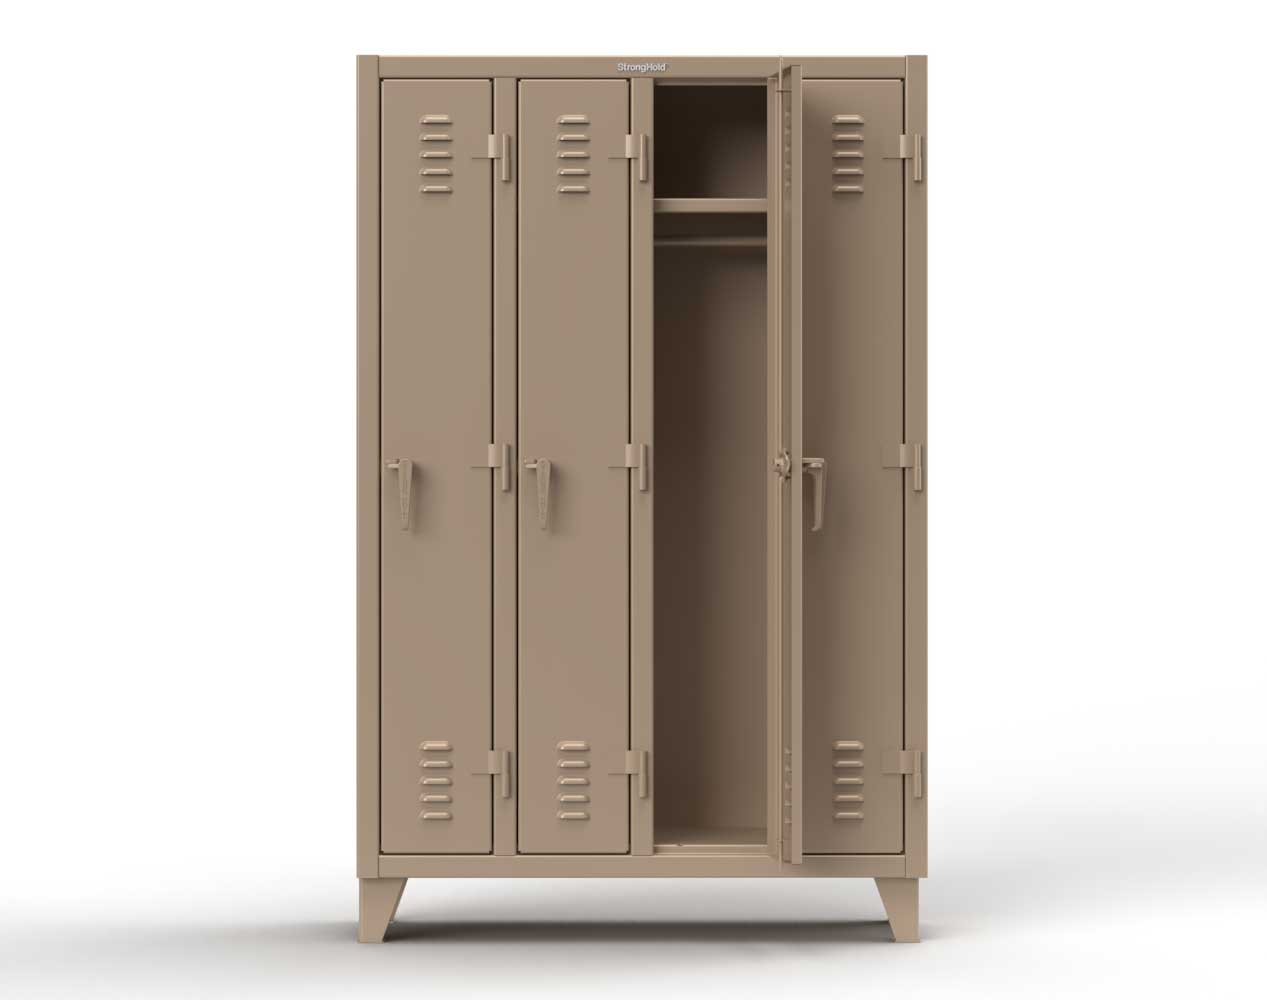 Extreme Duty 12 GA Single-Tier Locker with 4 Compartments, Louvered Doors, Wardrobe Rod - 50 in. W x 18in. D x 78 in. H